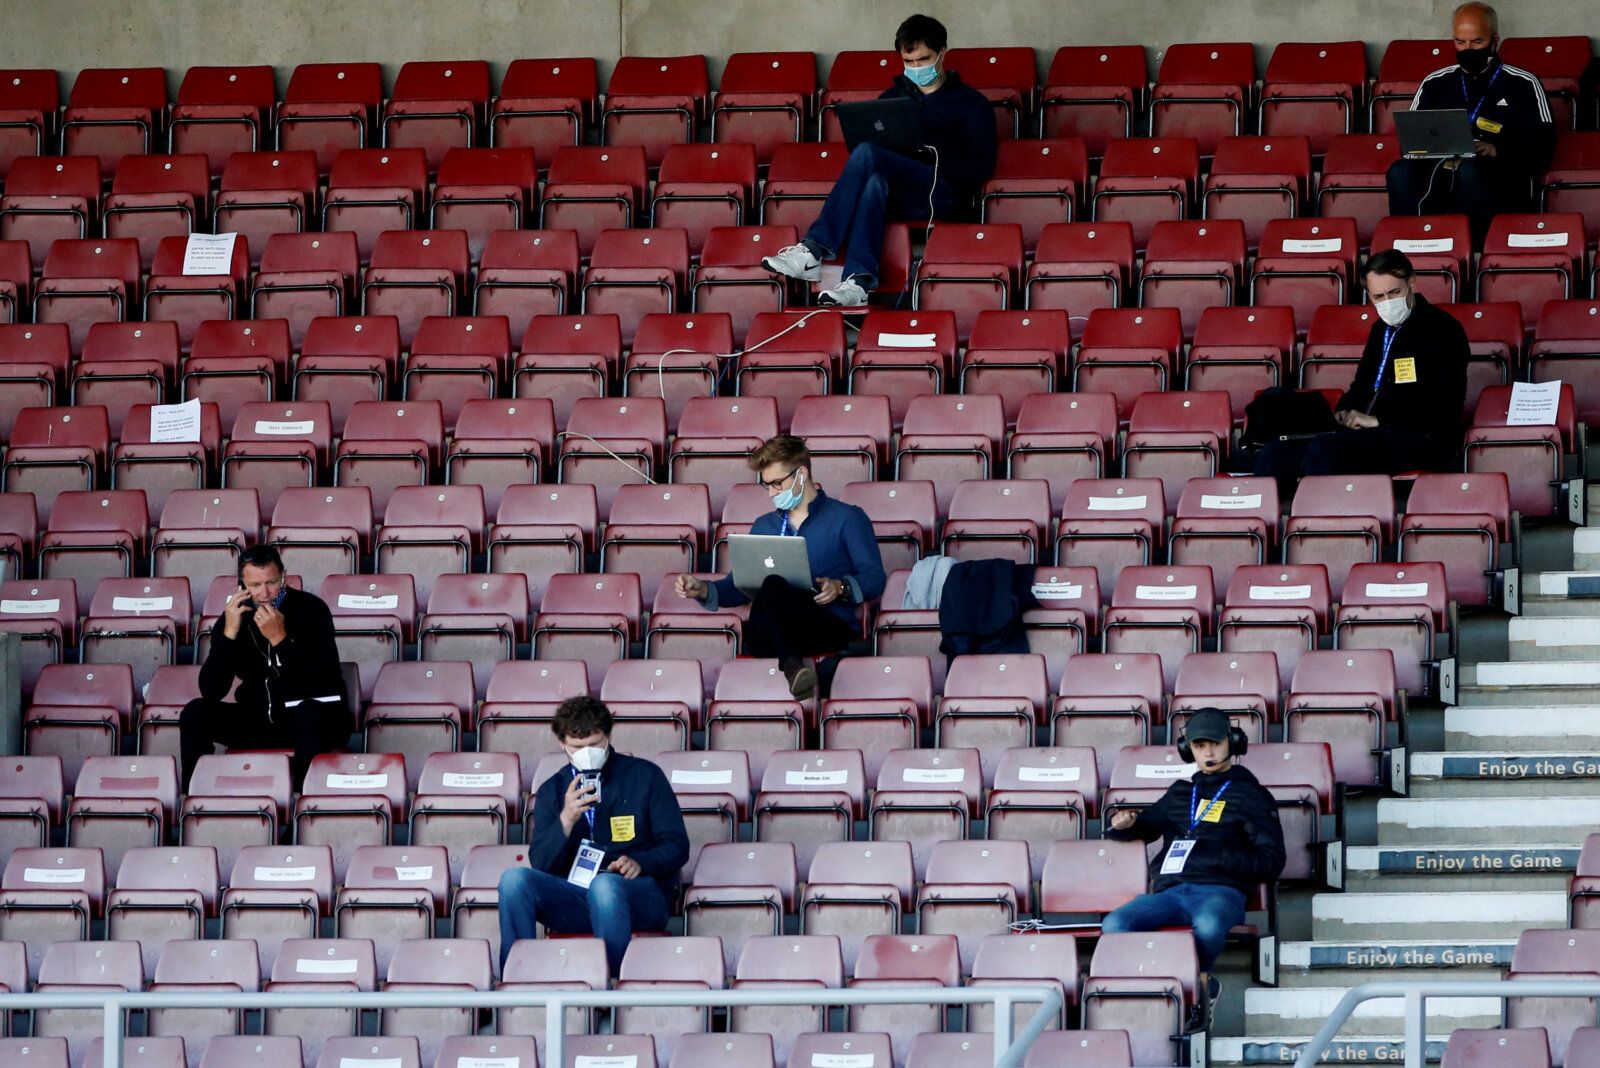 Soccer Football - League Two - Semi Final First Leg - Northampton Town v Cheltenham Town - Sixfields Stadium, Northampton, Britain - June 18, 2020   A general view of members of the media sat at a social distance in the stands as play resumes behind closed doors following the outbreak of the coronavirus disease (COVID-19)   Action Images/Andrew Boyers    EDITORIAL USE ONLY. No use with unauthorized audio, video, data, fixture lists, club/league logos or 